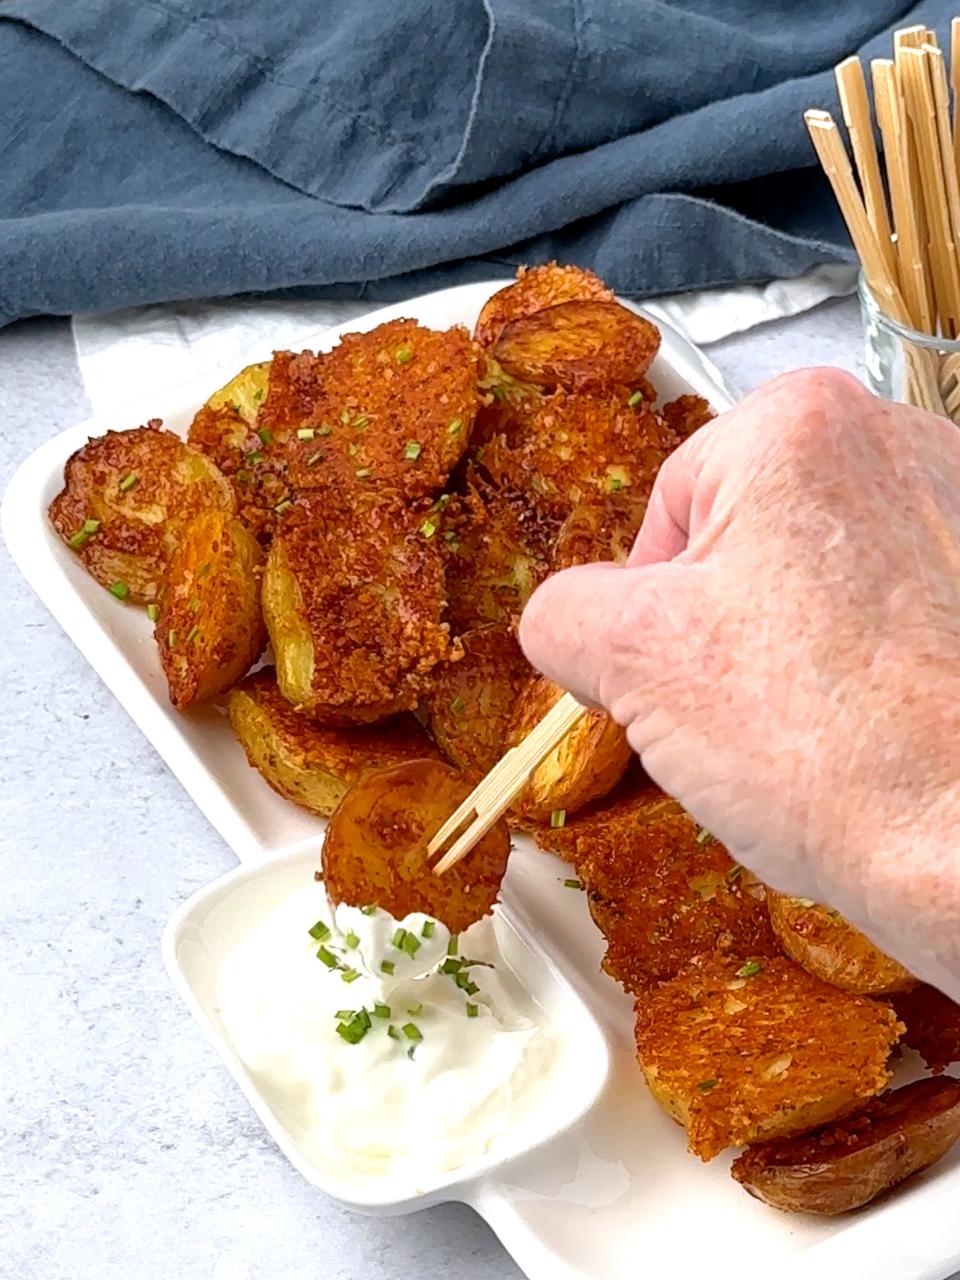 Crispy Parmesan Roasted Potatoes are tasty dipped in sour cream, ranch or ketchup.